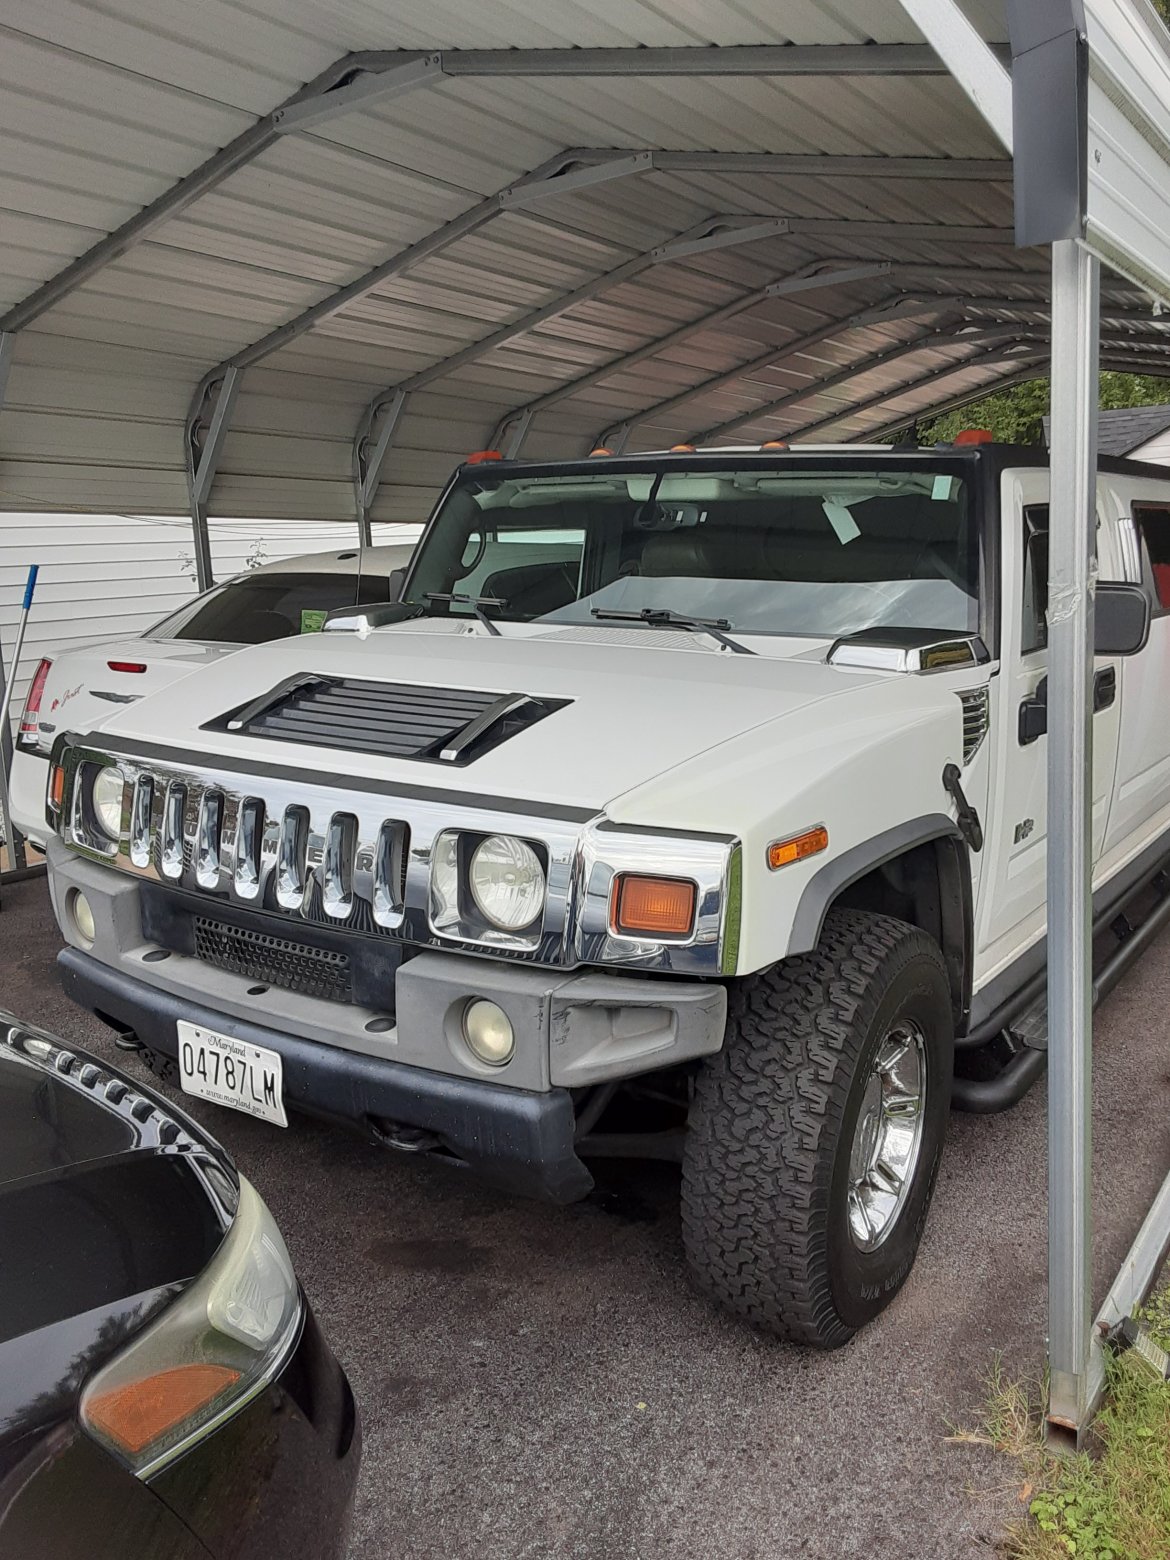 SUV Stretch for sale: 2005 Hummer H2 by Legendary